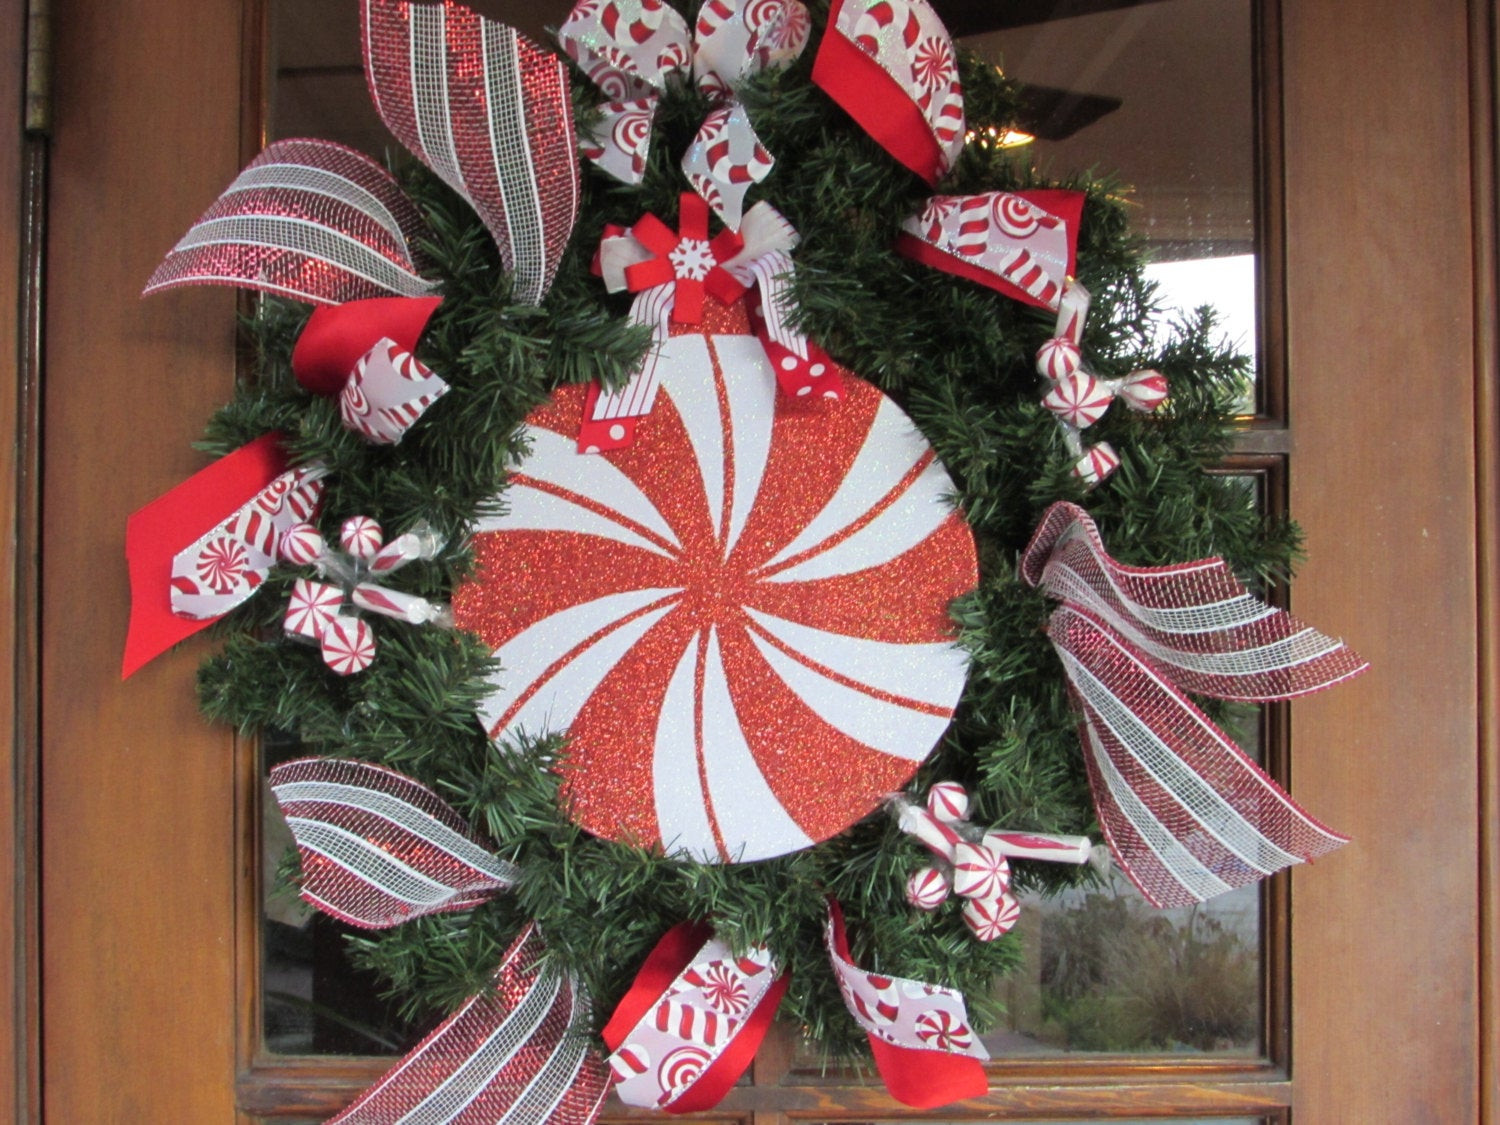 Christmas Candy Wreath
 20 Christmas Wreath Mint Candy Wreath Red White